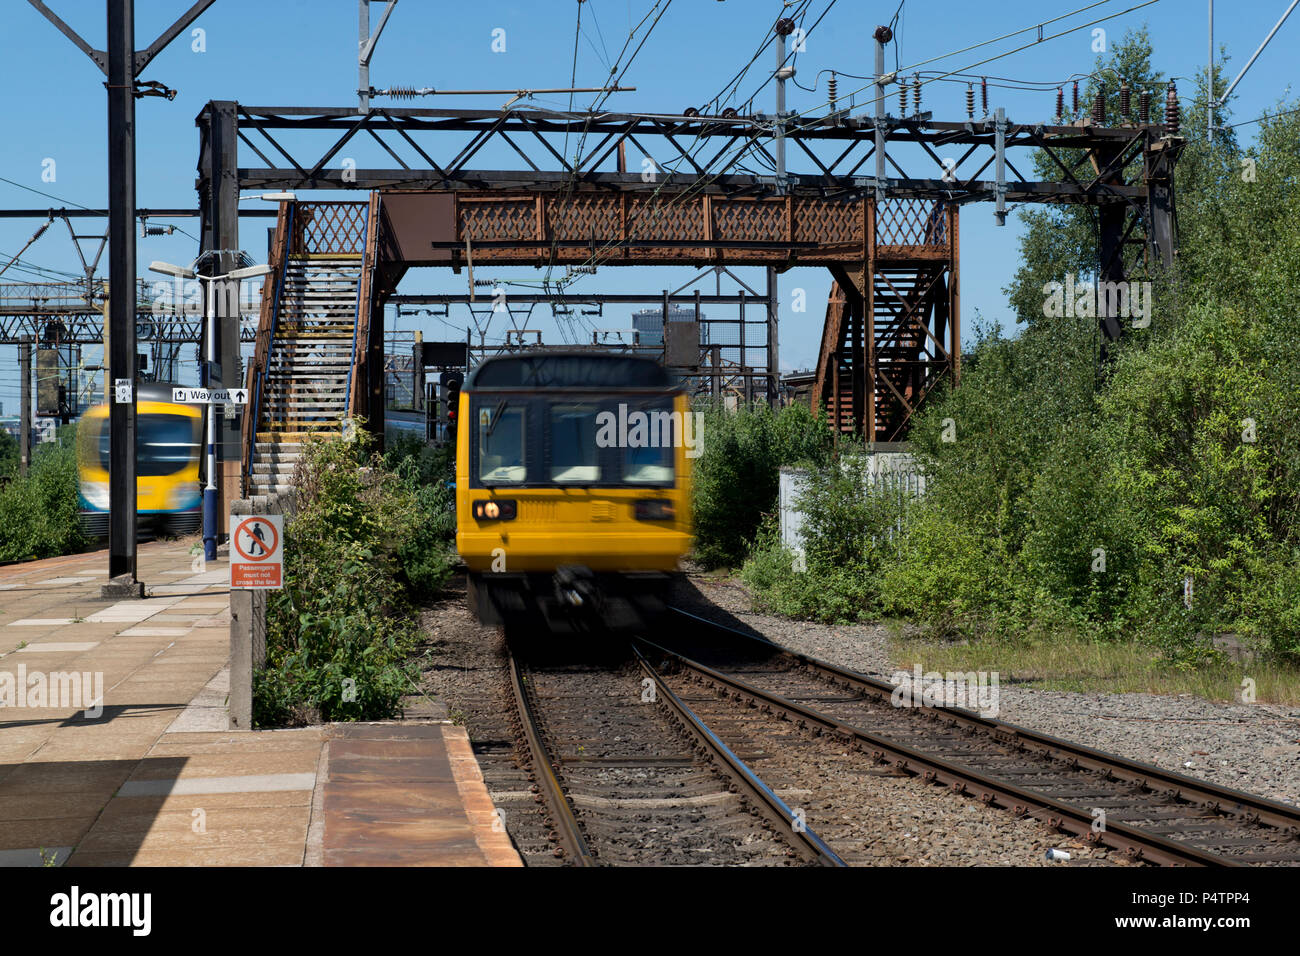 A British Rail Class 142 Pacer train passes through the run-down Ardwick railway station in Manchester. Stock Photo